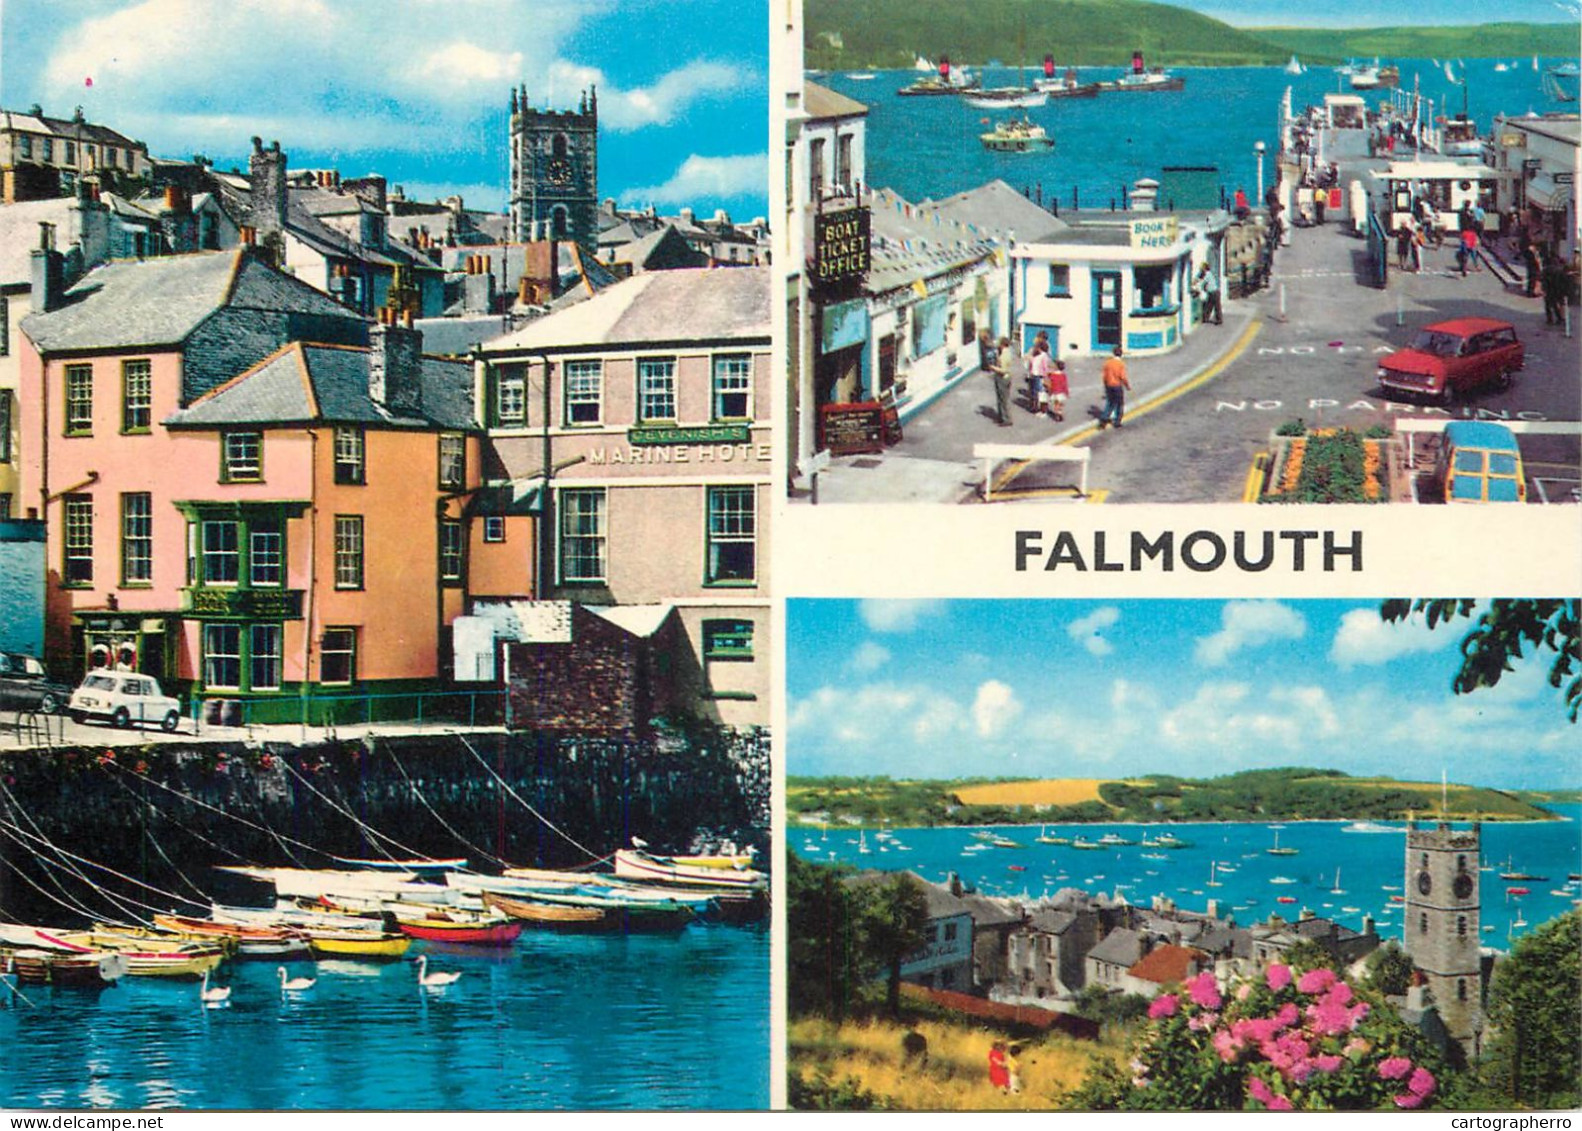 Navigation Sailing Vessels & Boats Themed Postcard Falmouth Harbour - Sailing Vessels